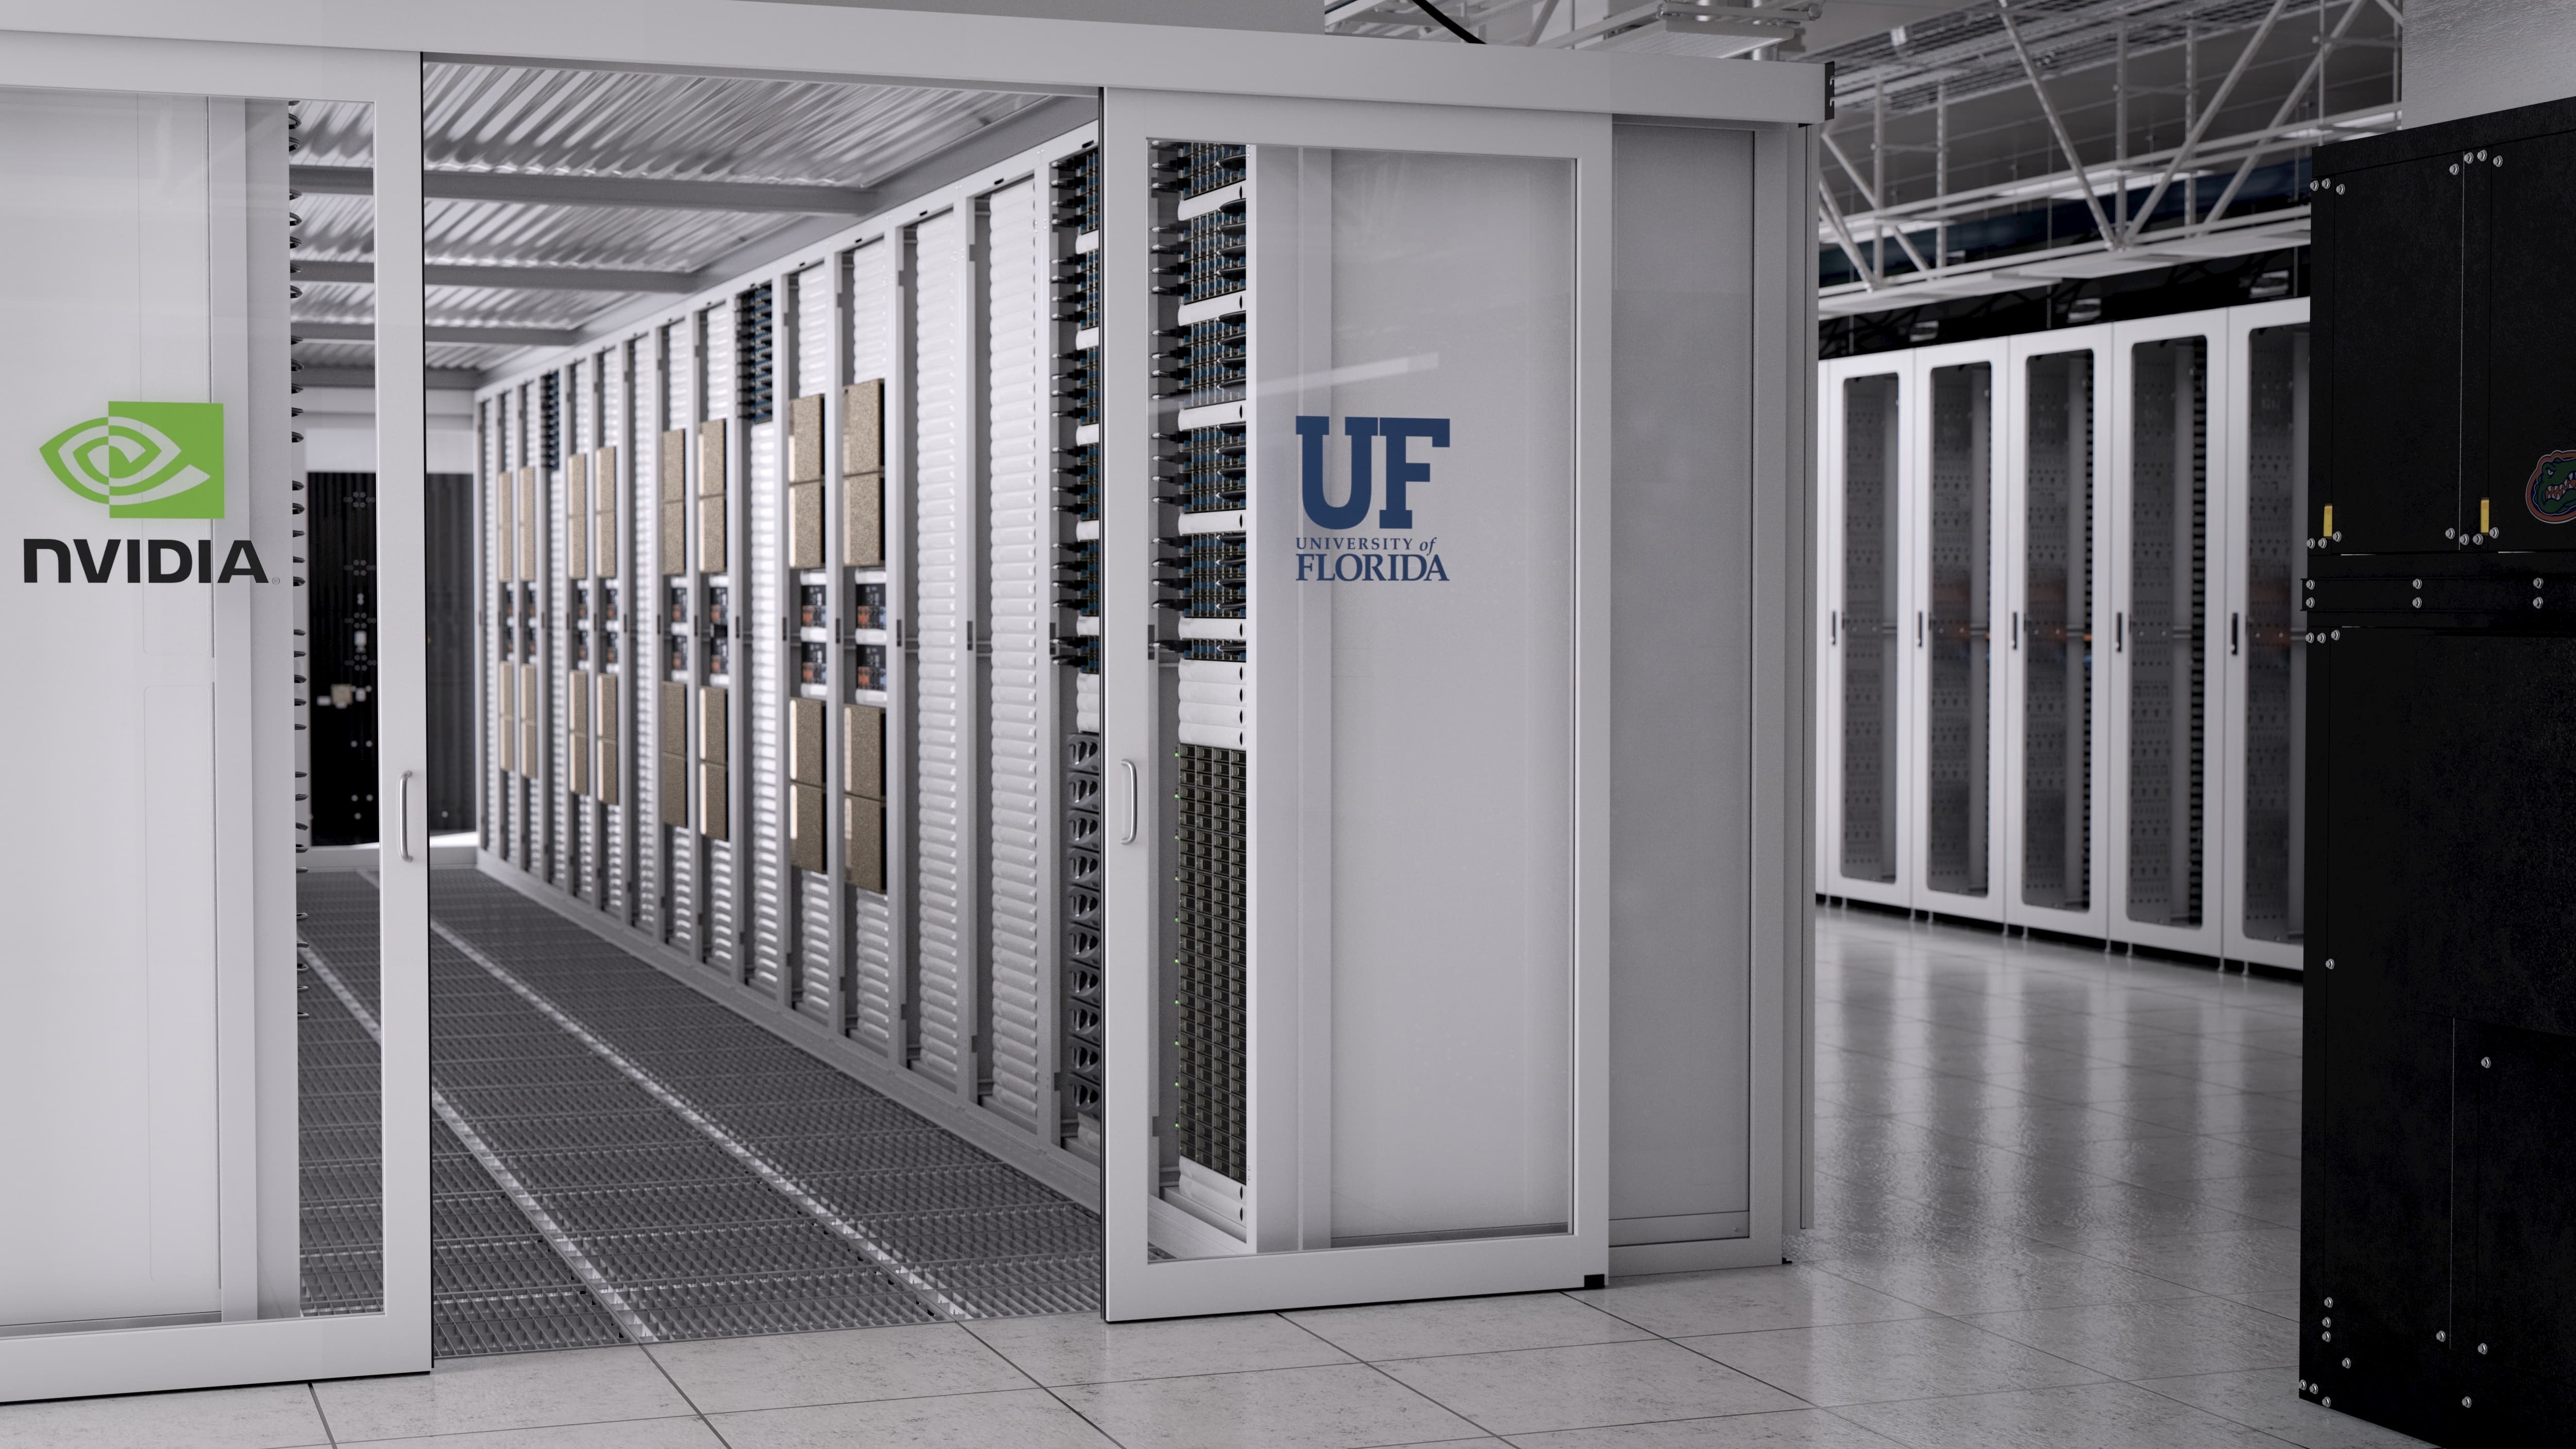 UF Announces $70 Million Artificial Intelligence Partnership with NVIDIA 